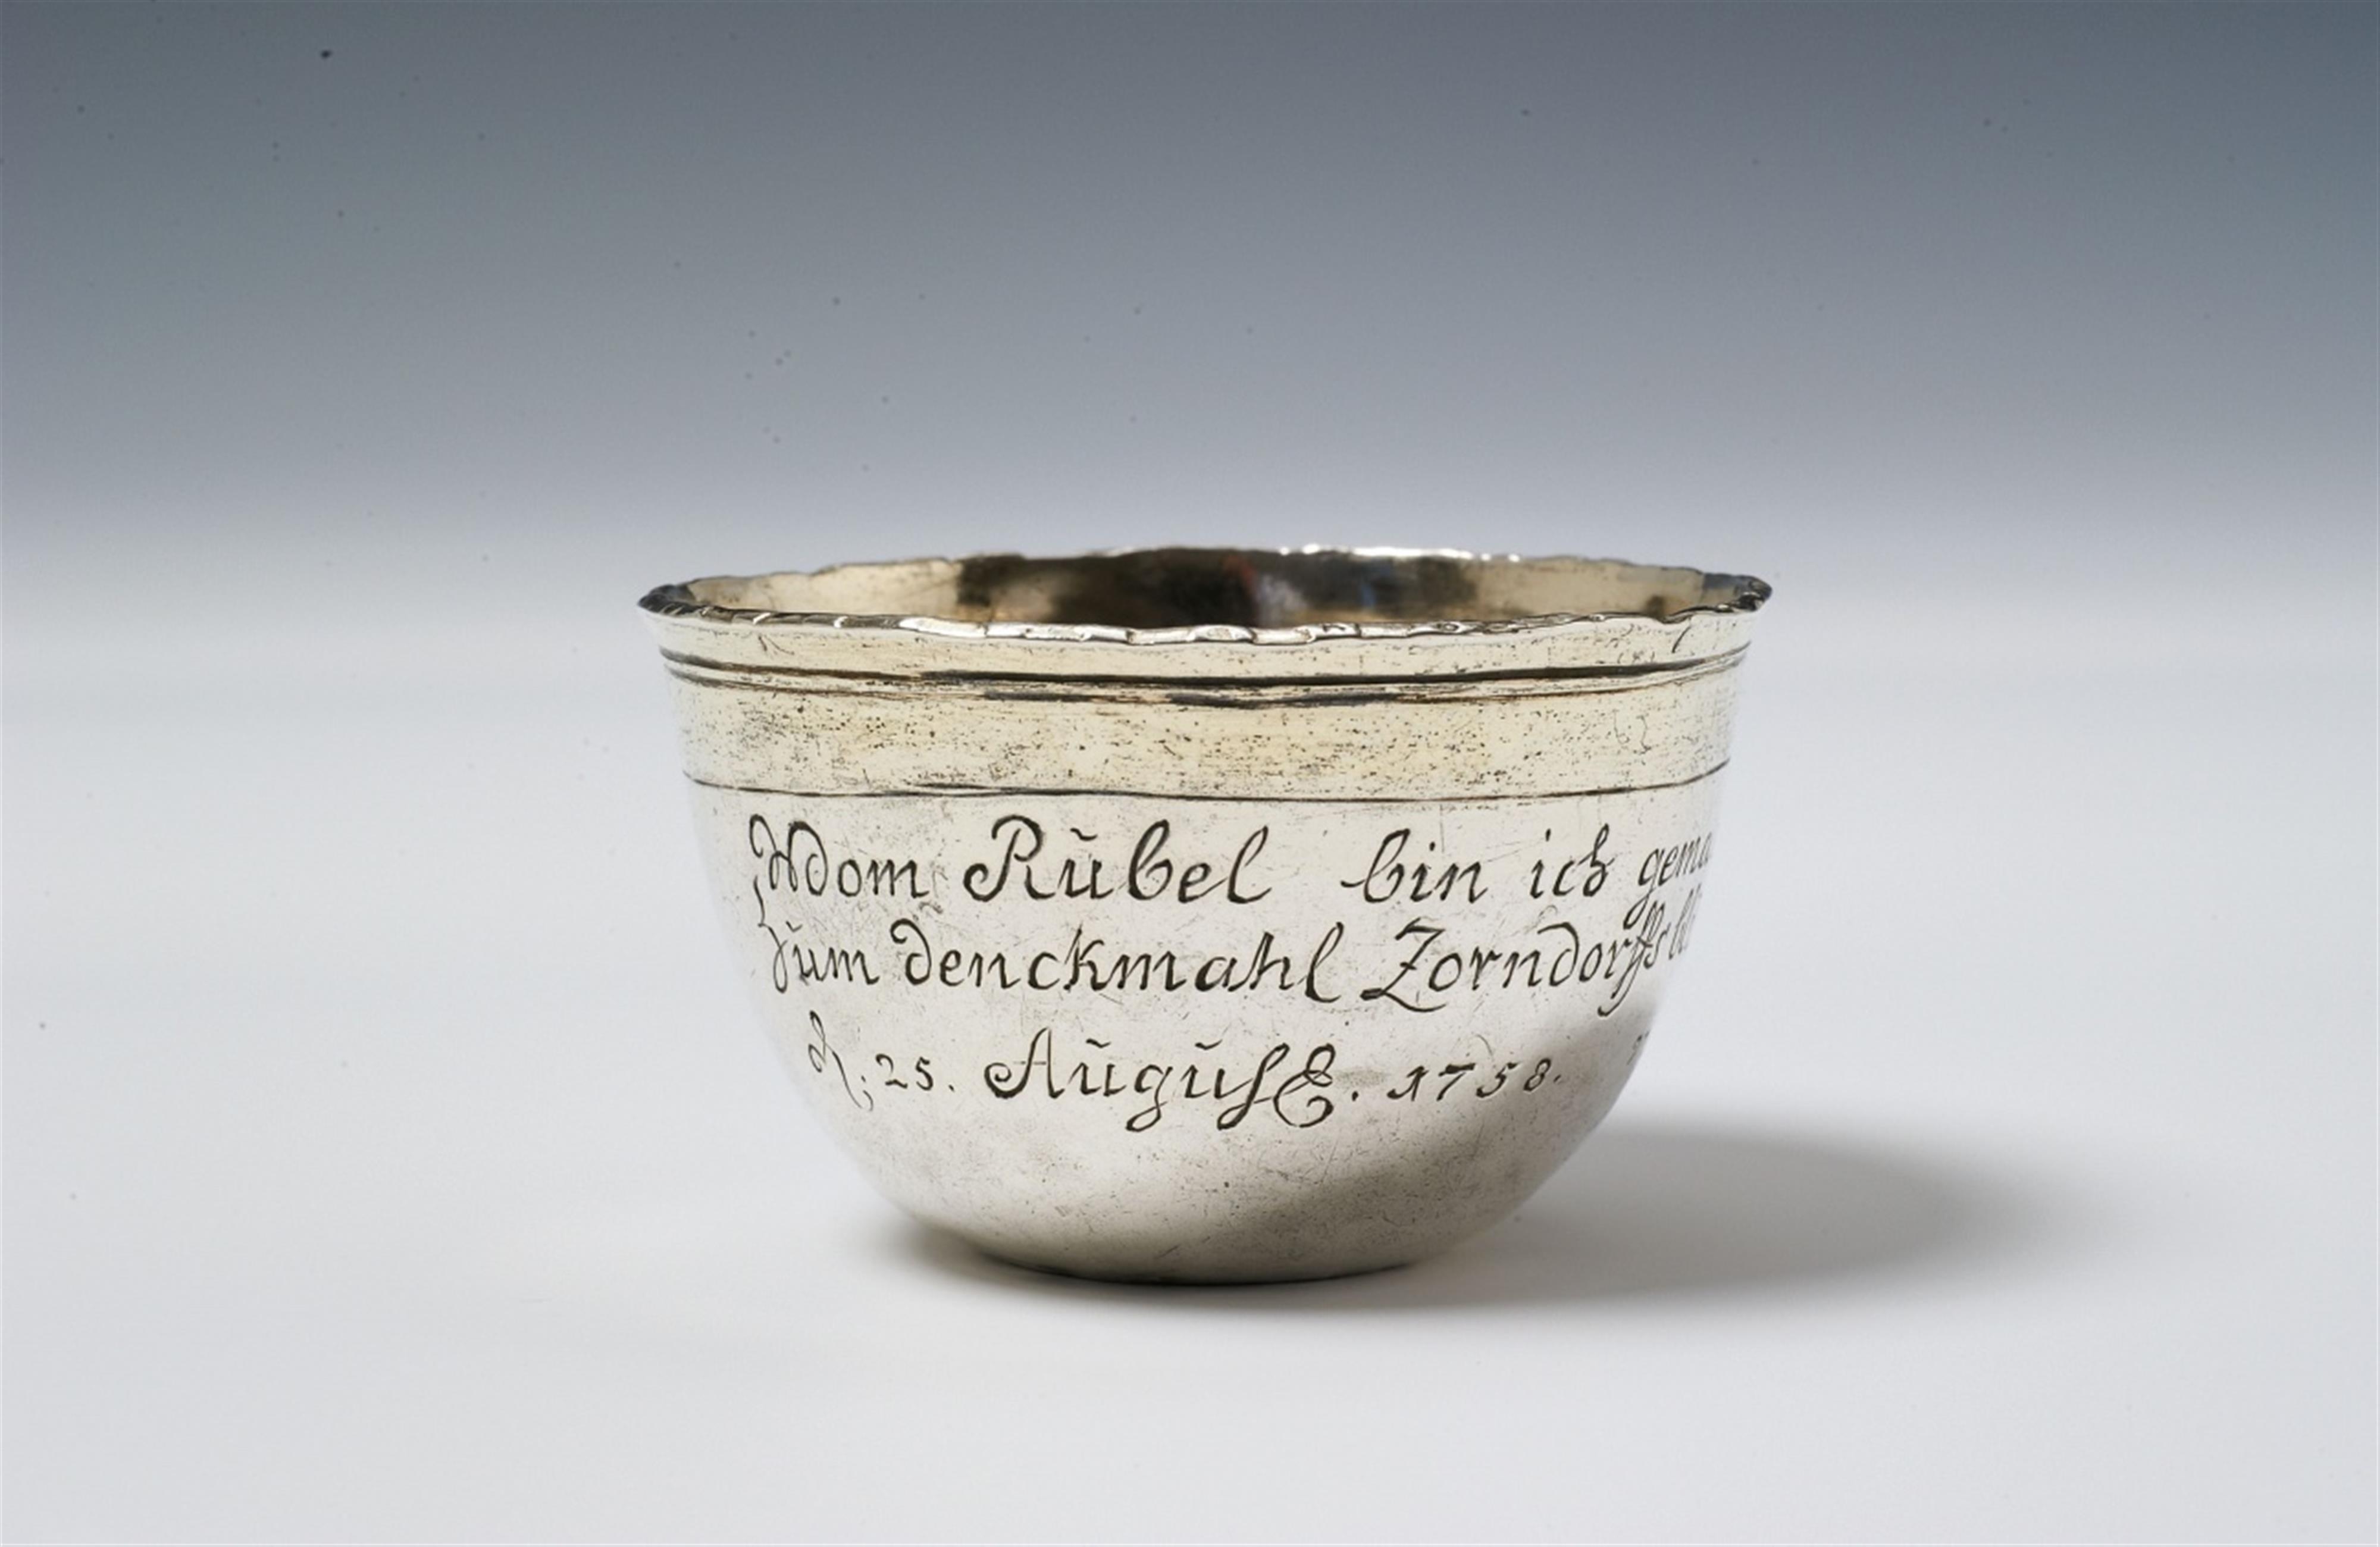 A Prussian silver gilt beaker formed from a rubel coin. Monogrammed "vL" and with an inscription commemorating the battle of Zorndorff on 25th August 1758. Unmarked, ca. 1758. - image-1